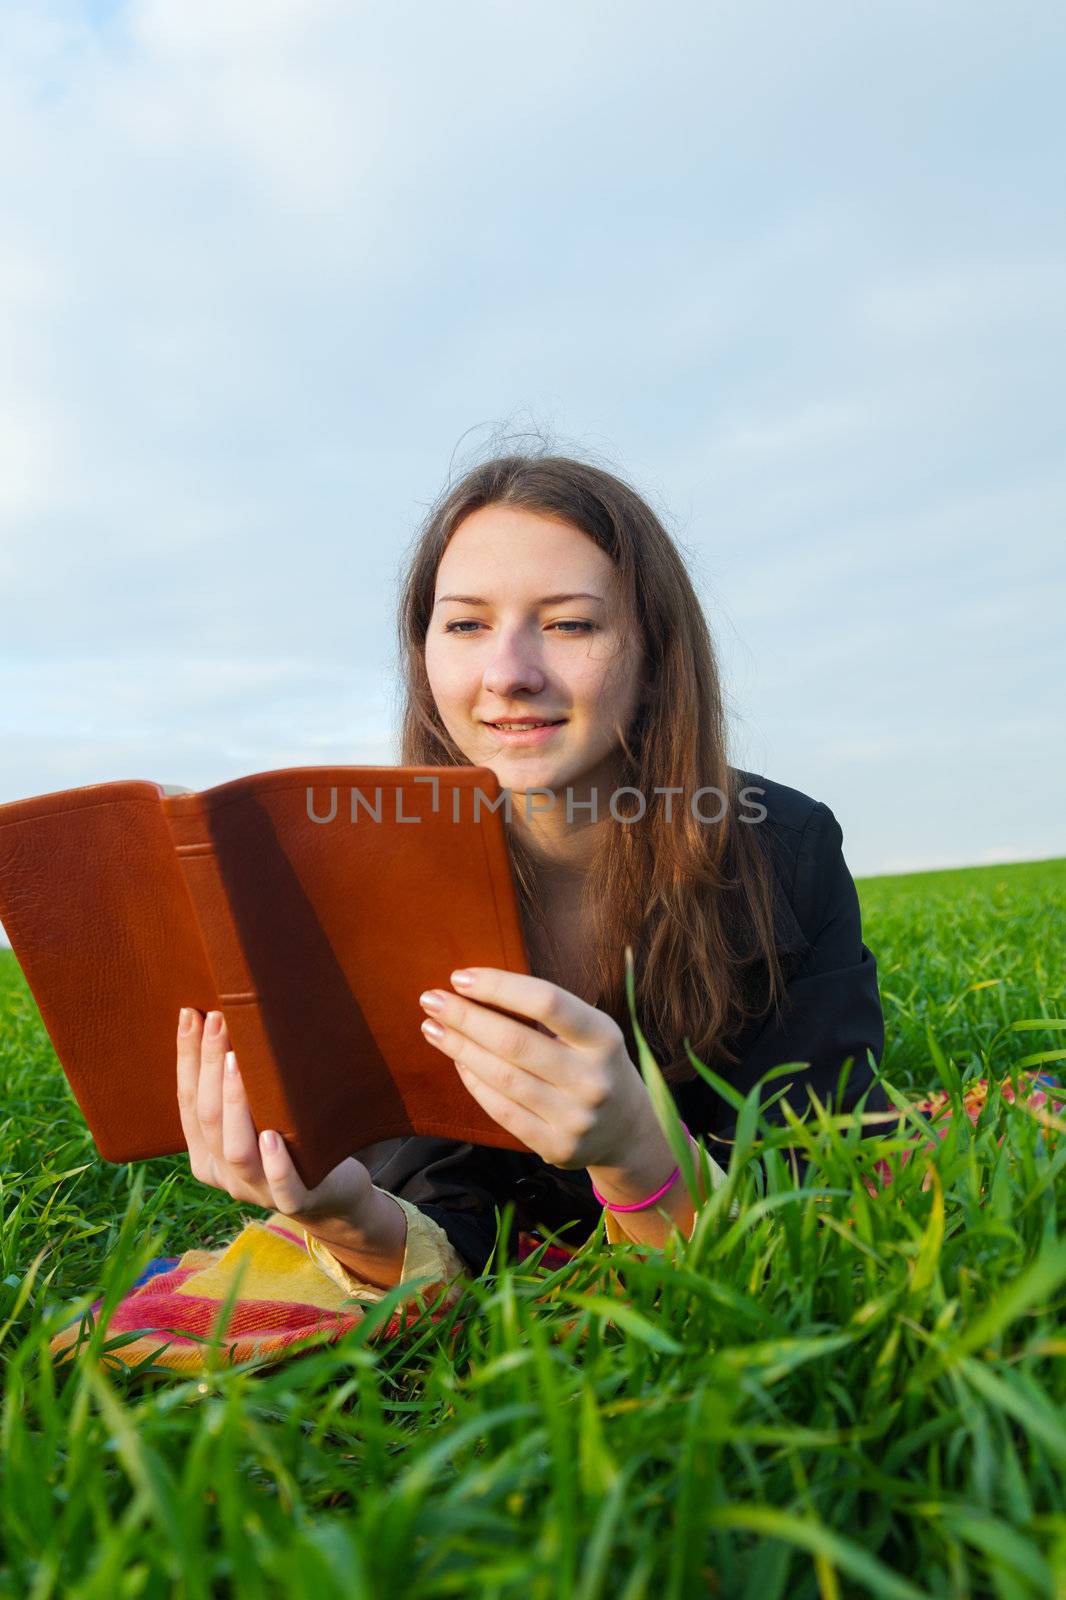 Teen girl reading the Bible outdoors at sunset time